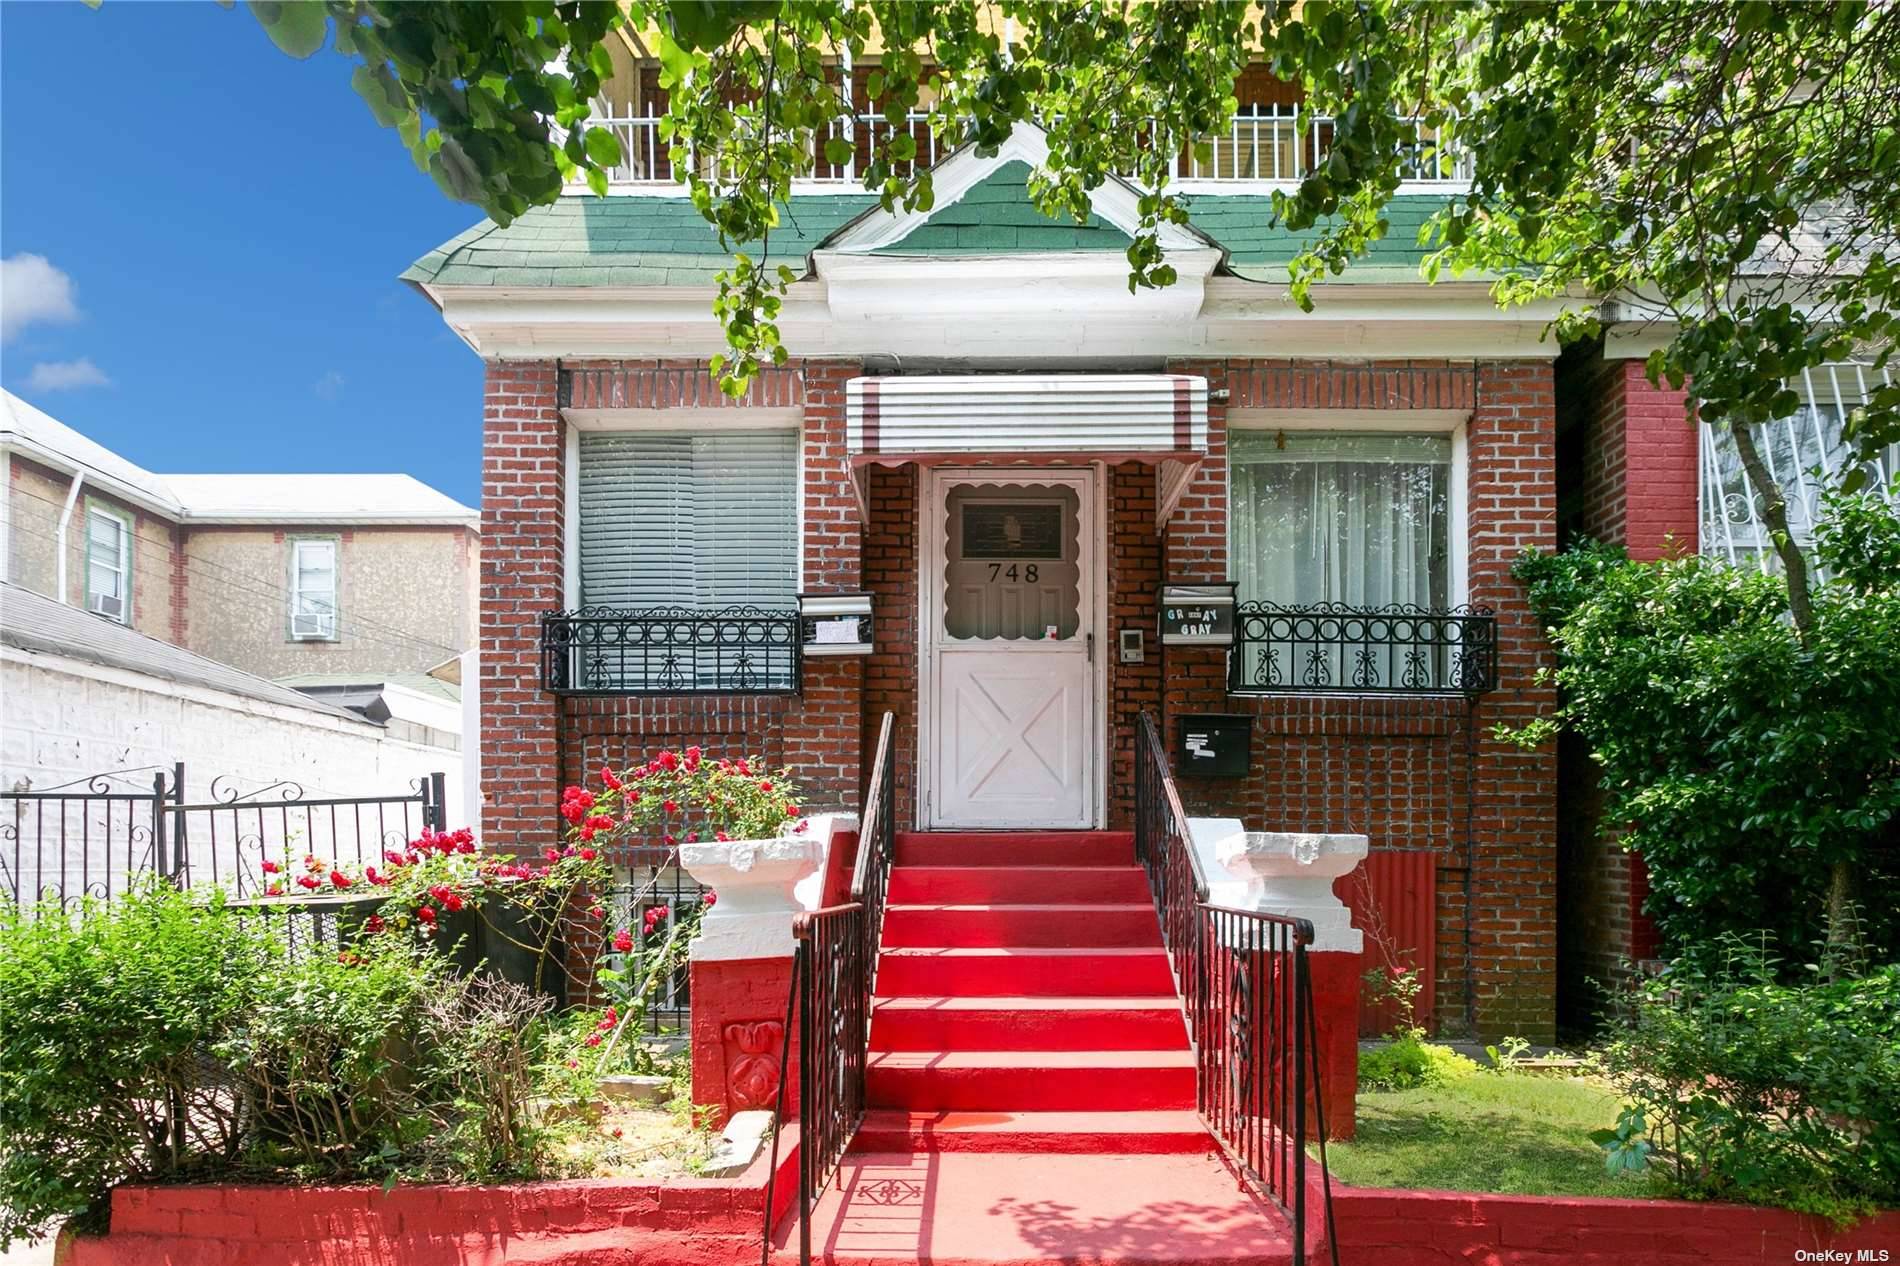 New to the market. Attractive 2 family home in the desirable Kensington neighborhood of Brooklyn.